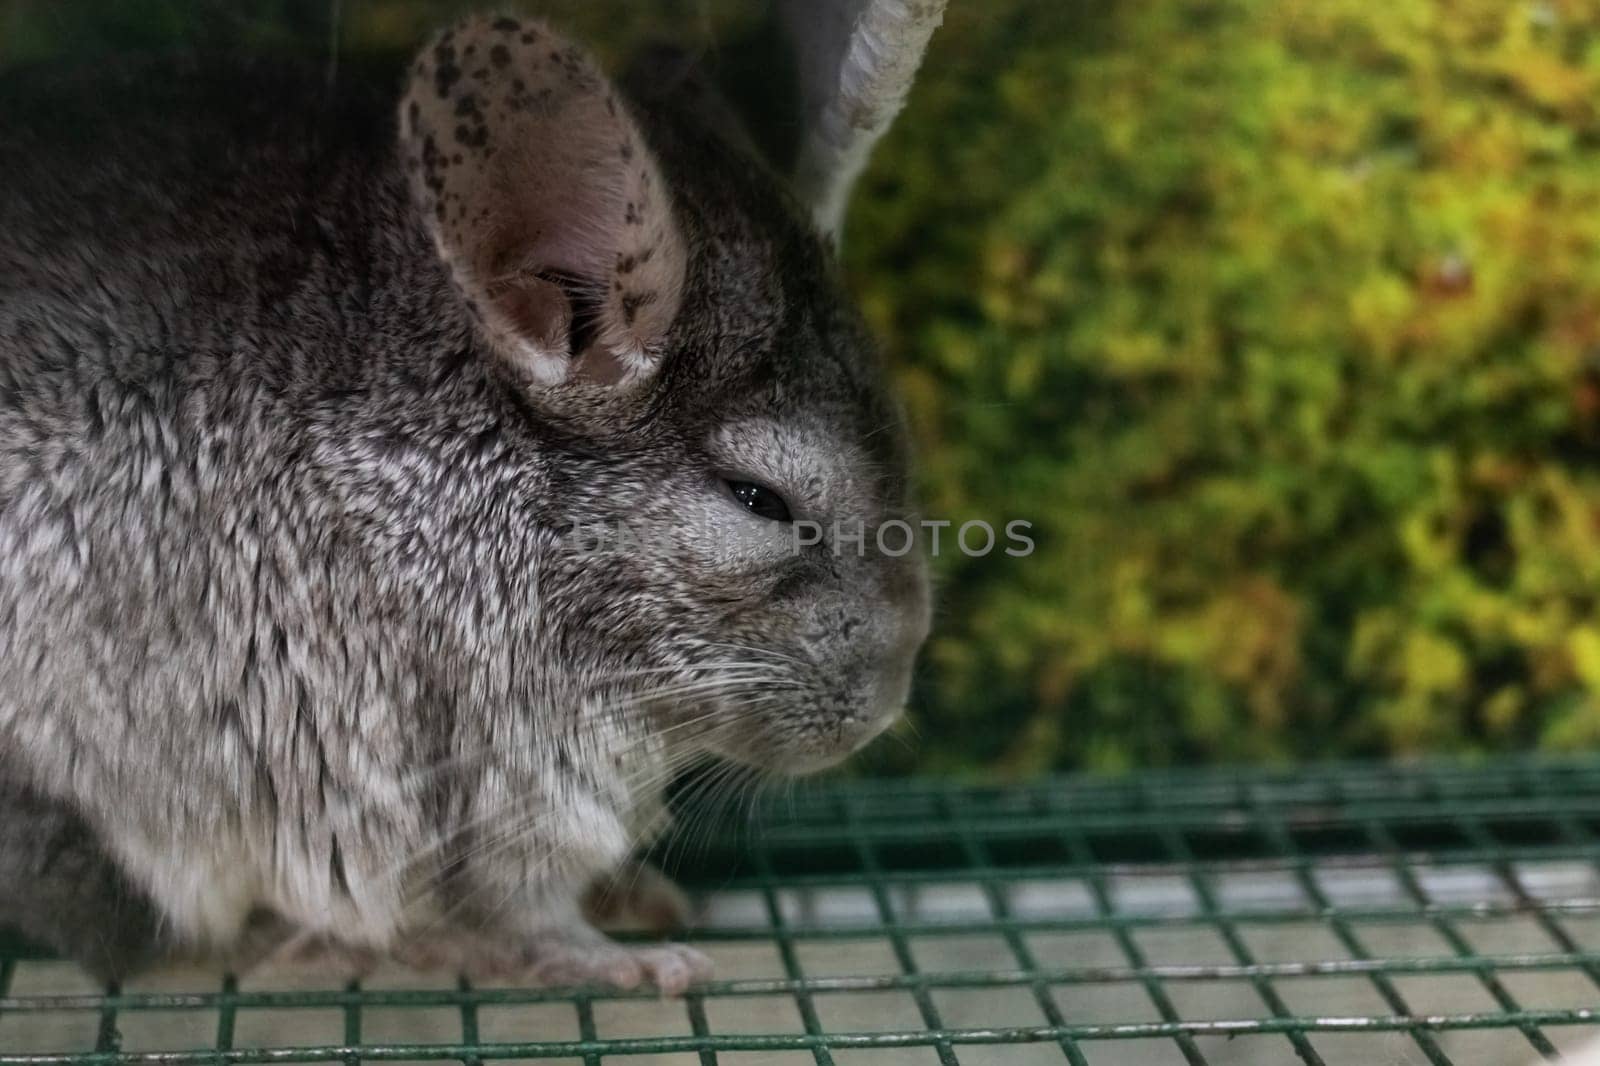 Spotted gray rabbit in a cage, closeup portrait by Vera1703